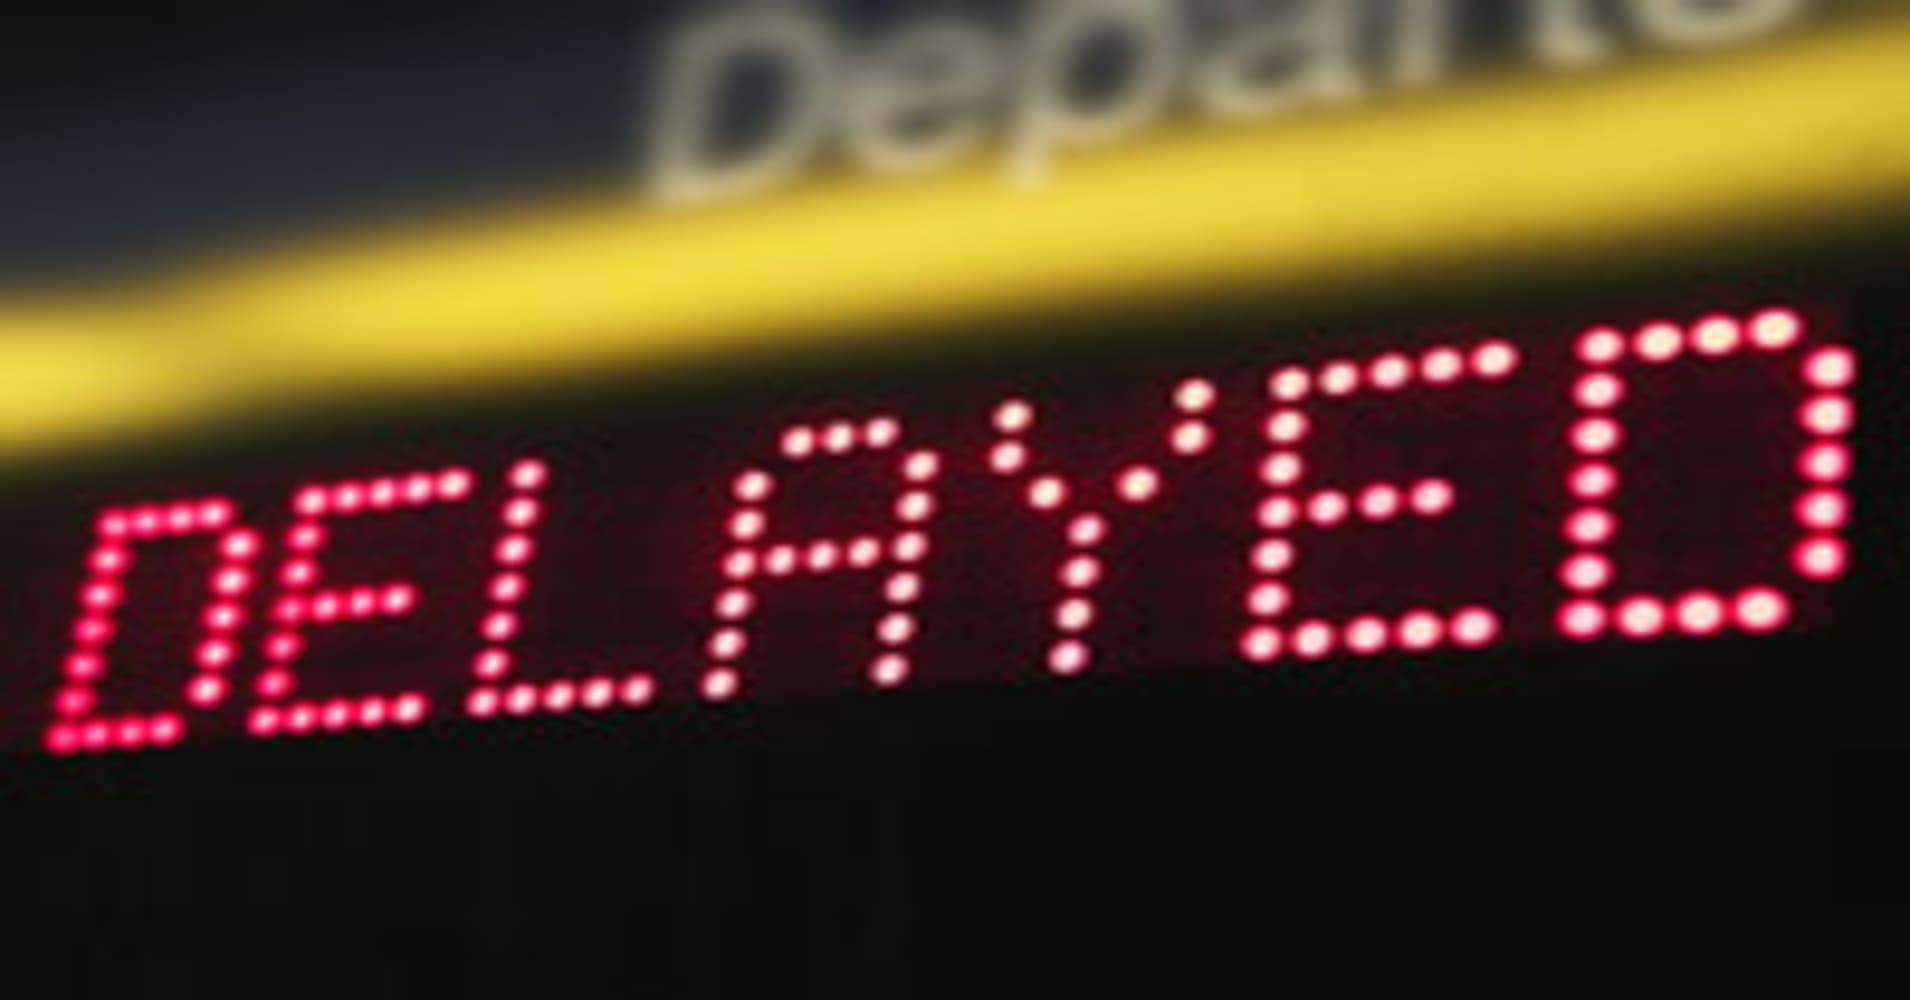 Flight Delayed or Canceled? How to Get Reaccommodated Fast